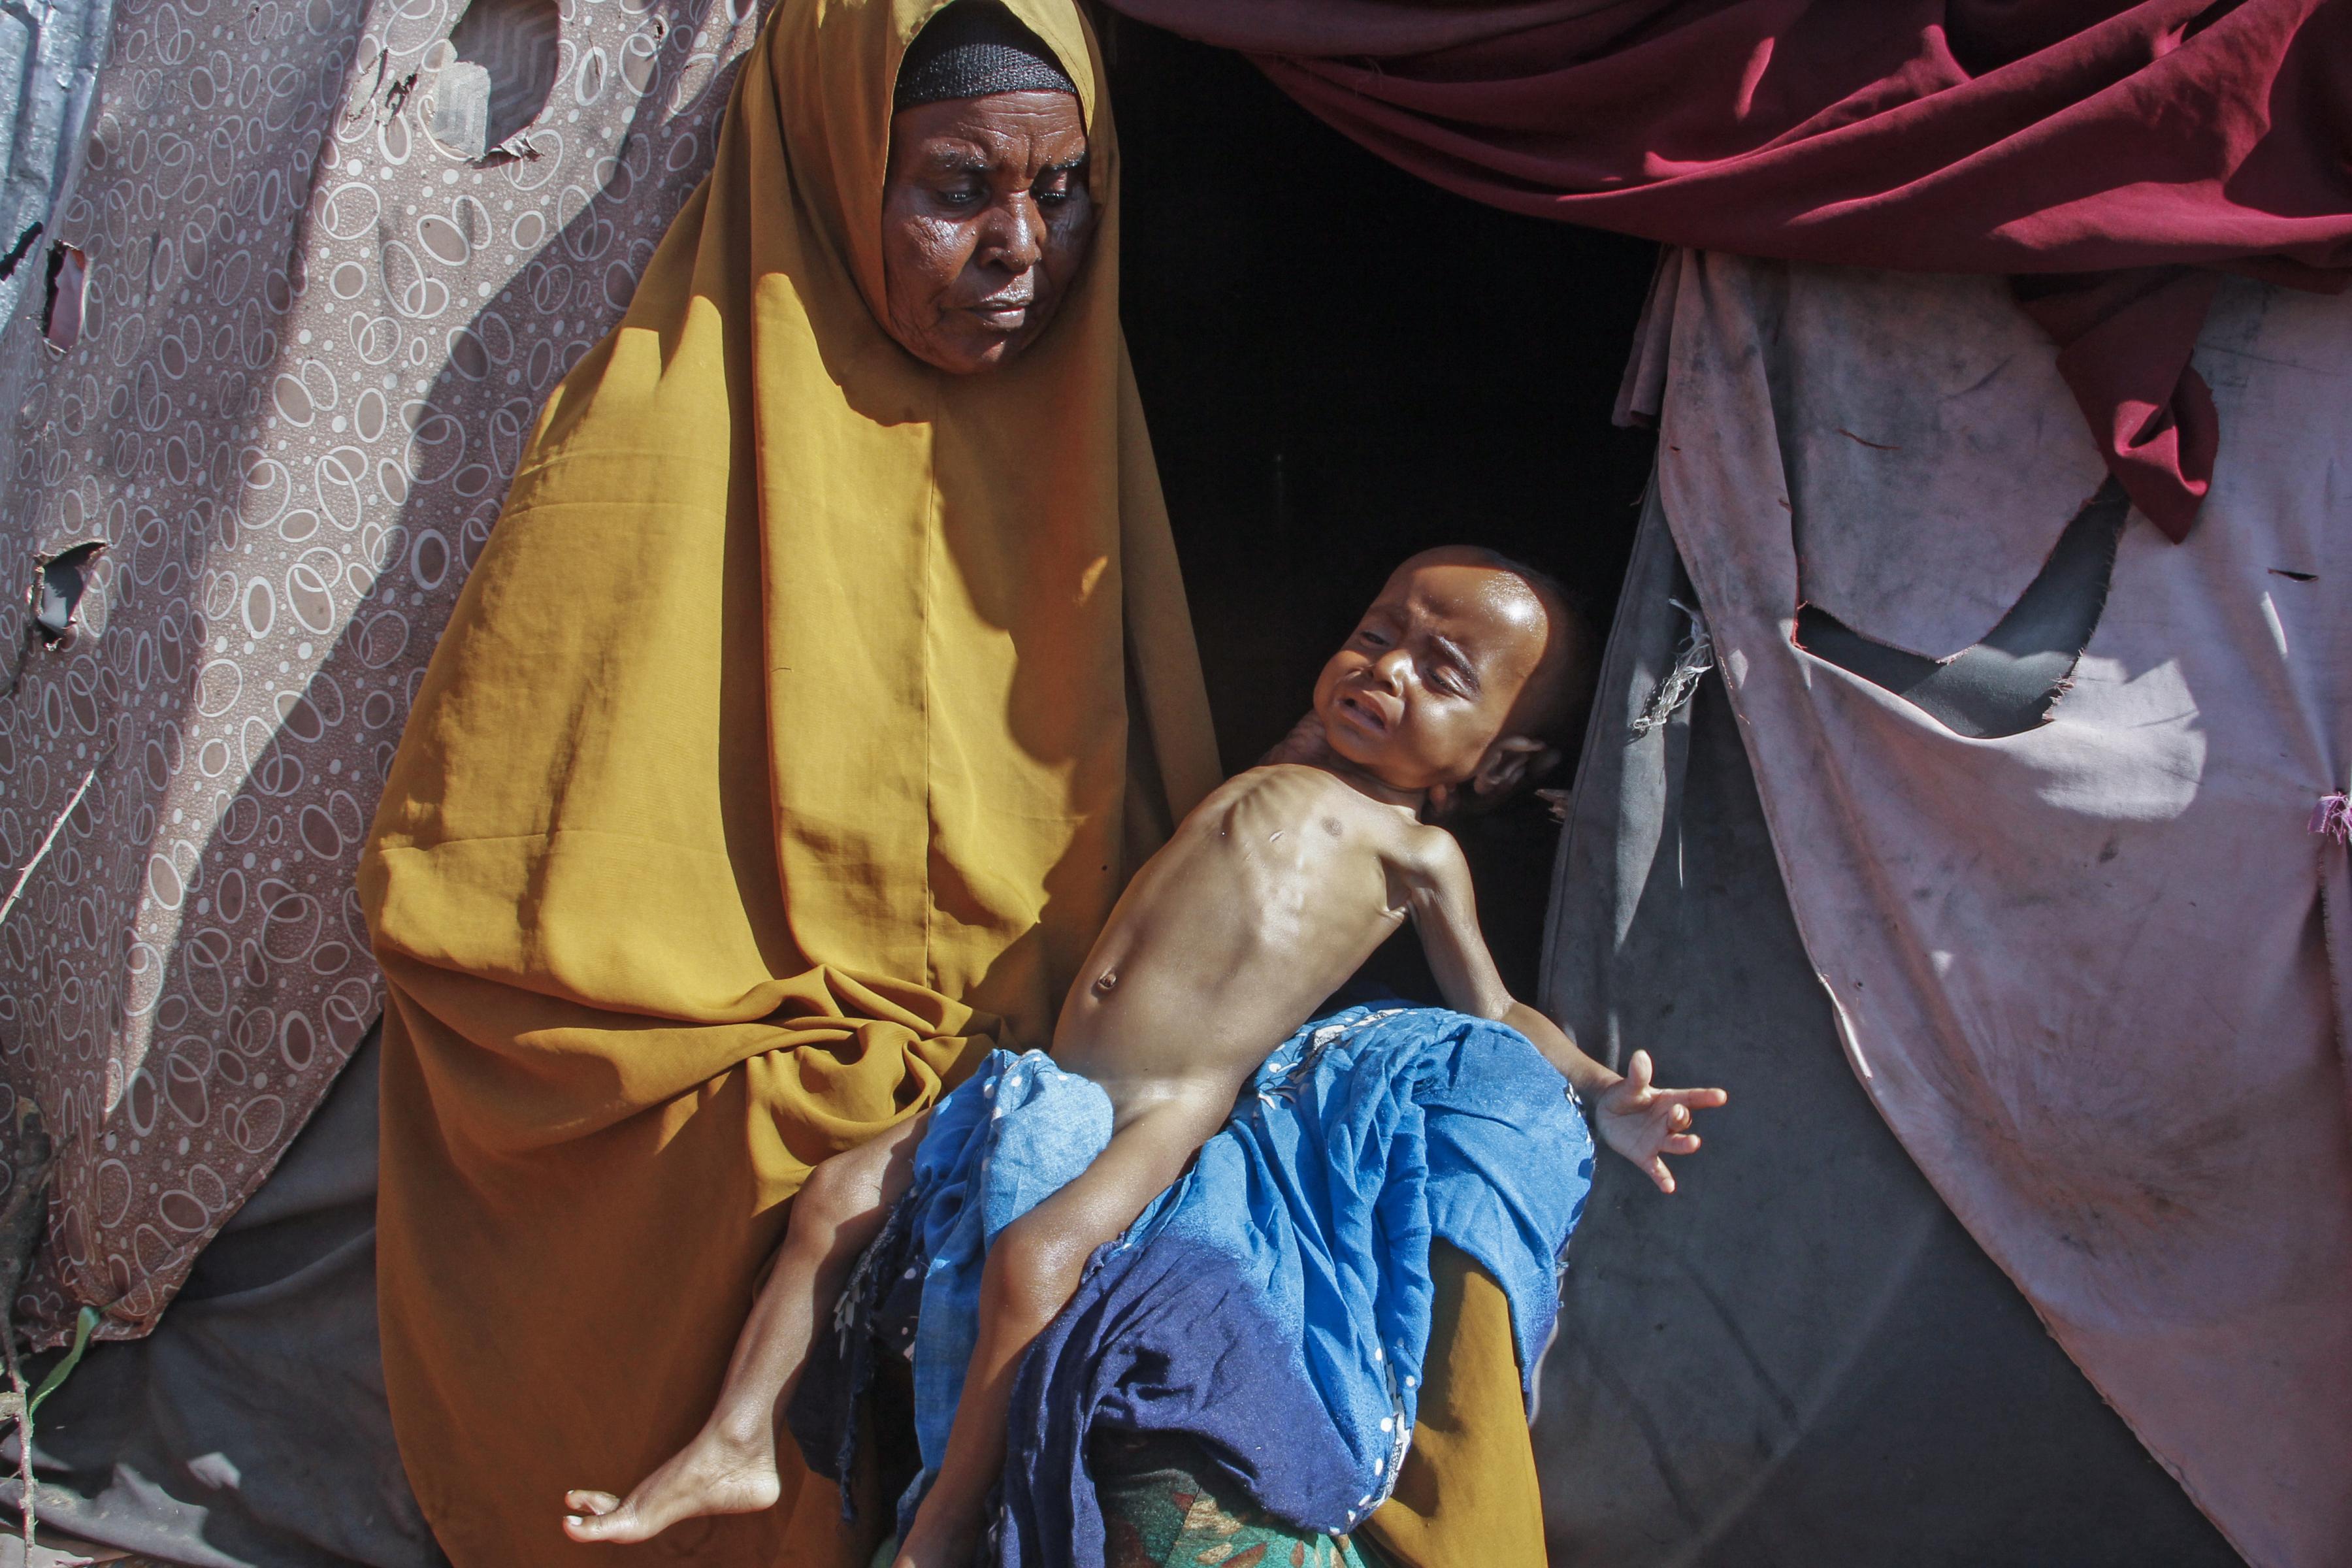 63-year-old with grandchild outside tent camp, after fleeing drought in Somalia.